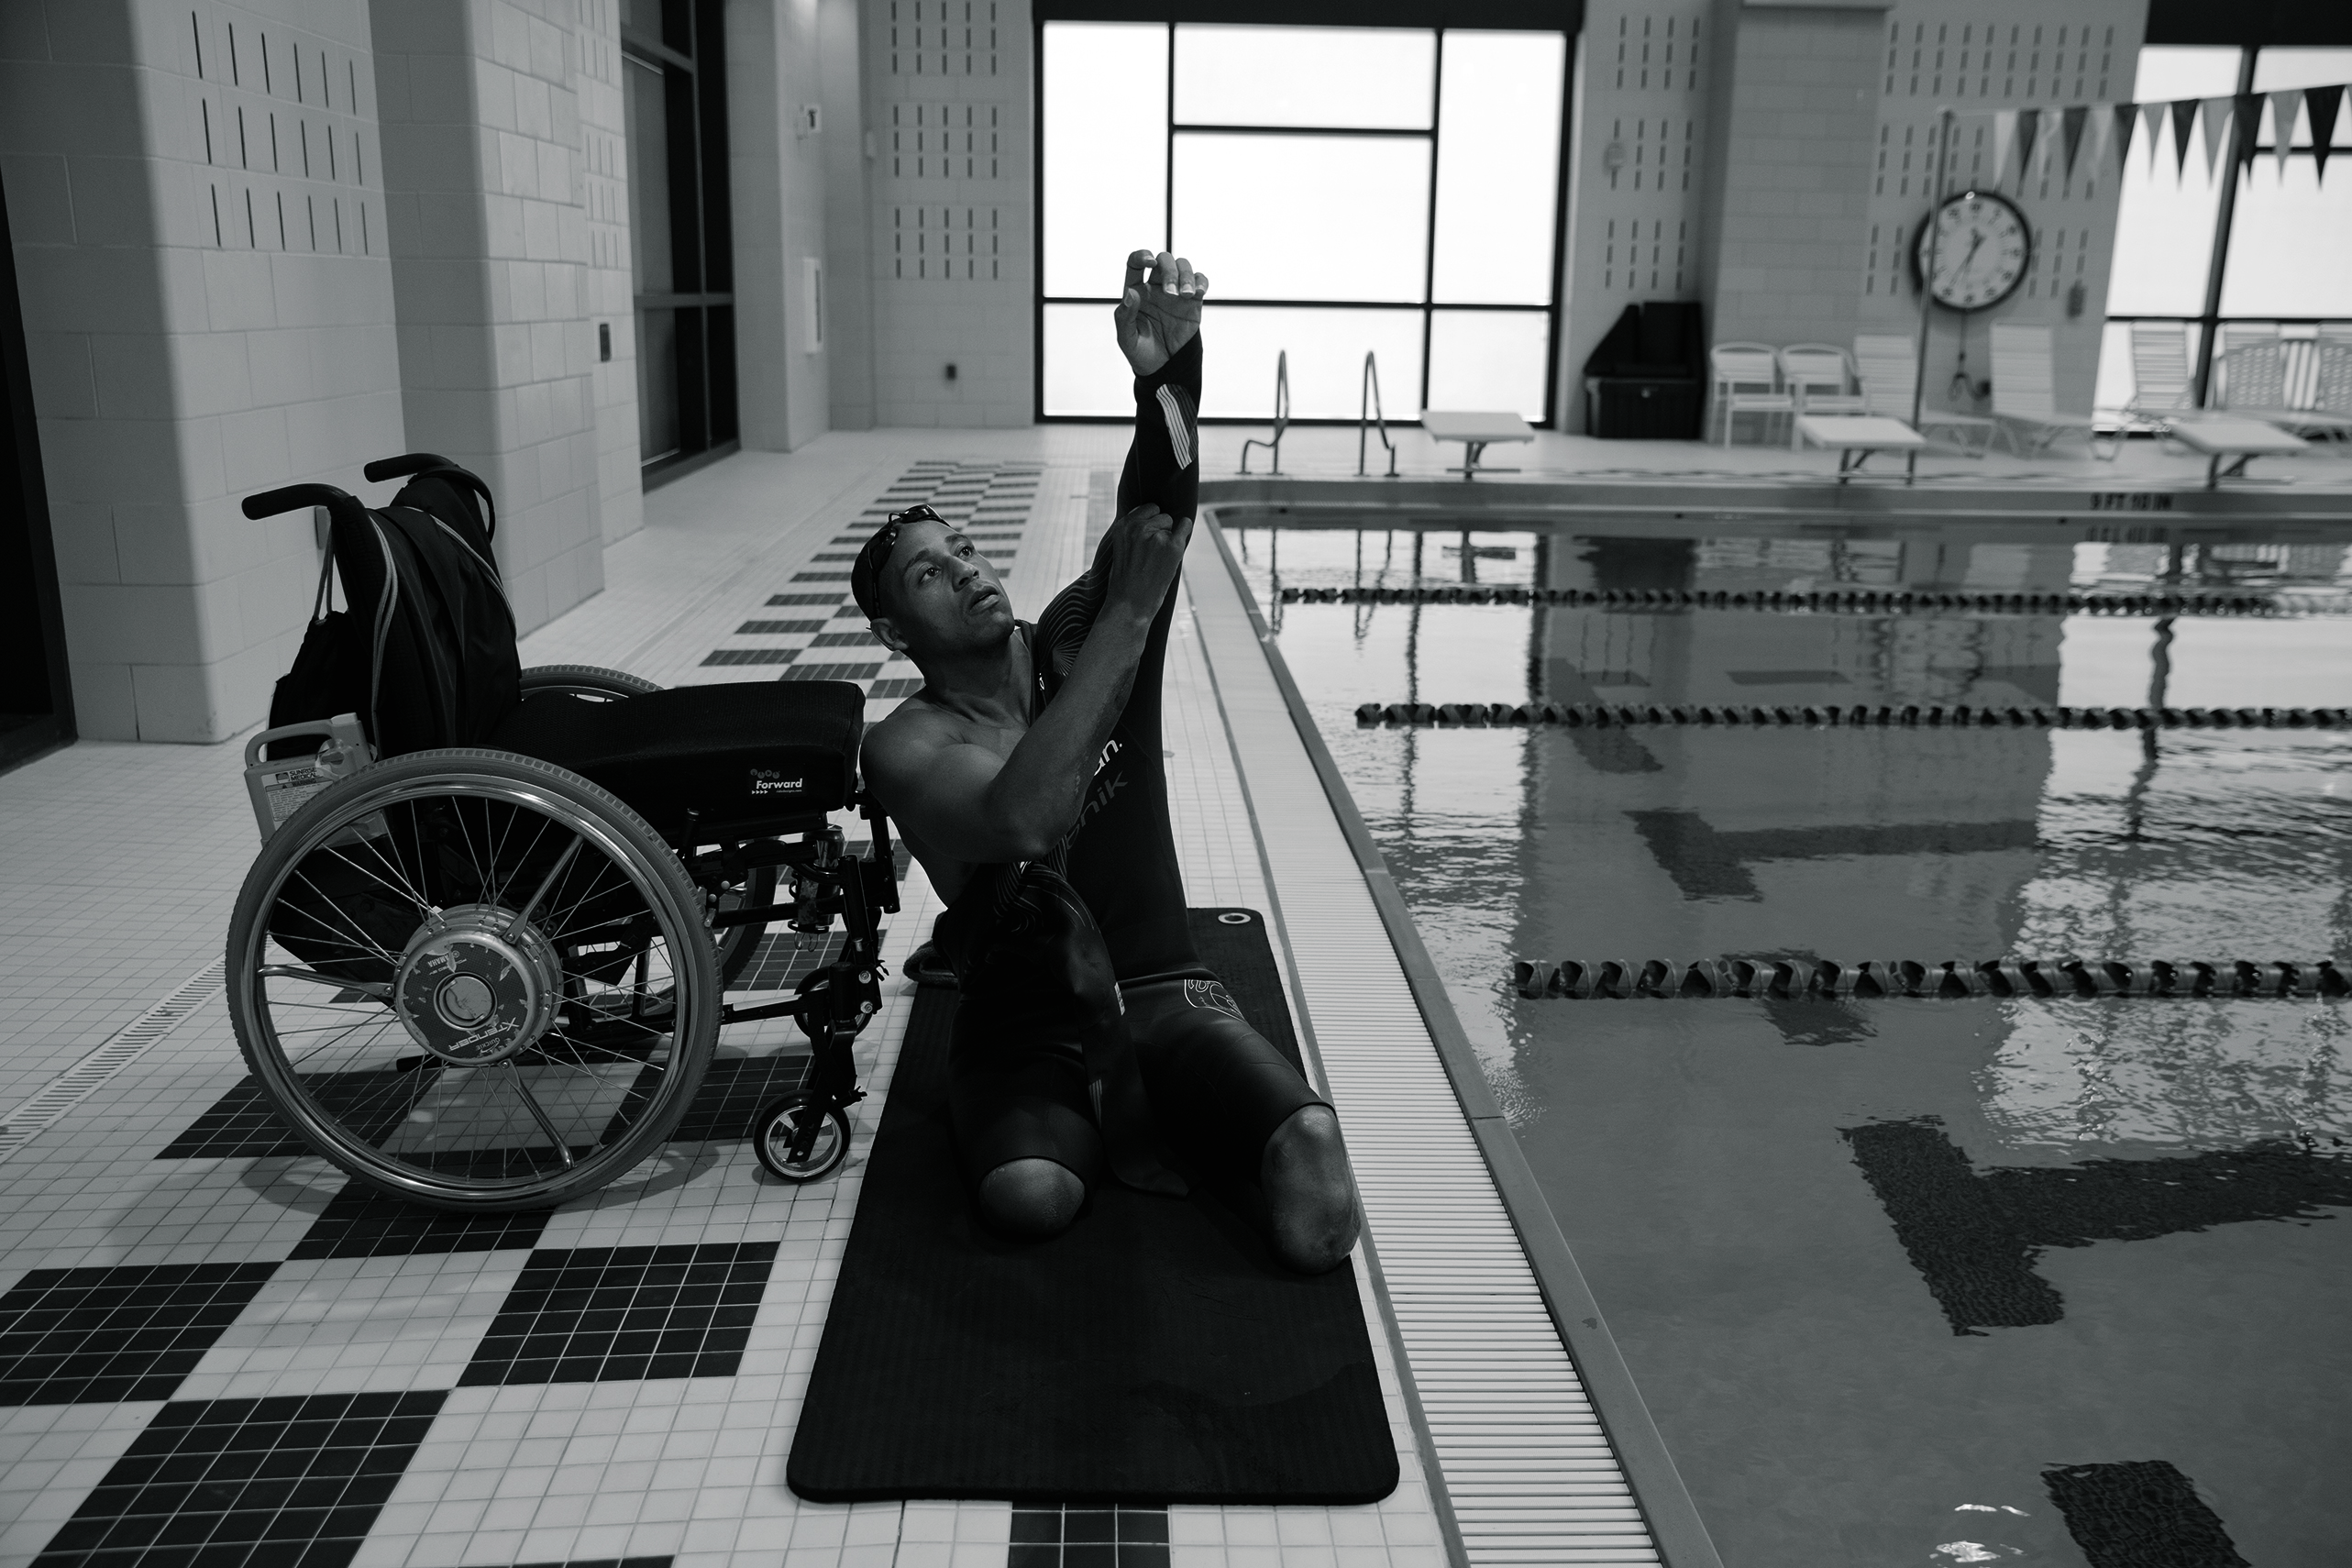 Before he started swimming at a Walter Reed pool, above, King would often fall asleep to audio of motivational speakers and Bible verses and play around on his iPad, searching for inspiration and a new talent. On a whim, he typed in “double amputee running” and was struck by videos of Scott Rigsby, a double-leg-amputee triathlete. “It felt so good to see that was possible,” he says. “I was like, Man, maybe this is what I’m supposed to do.”